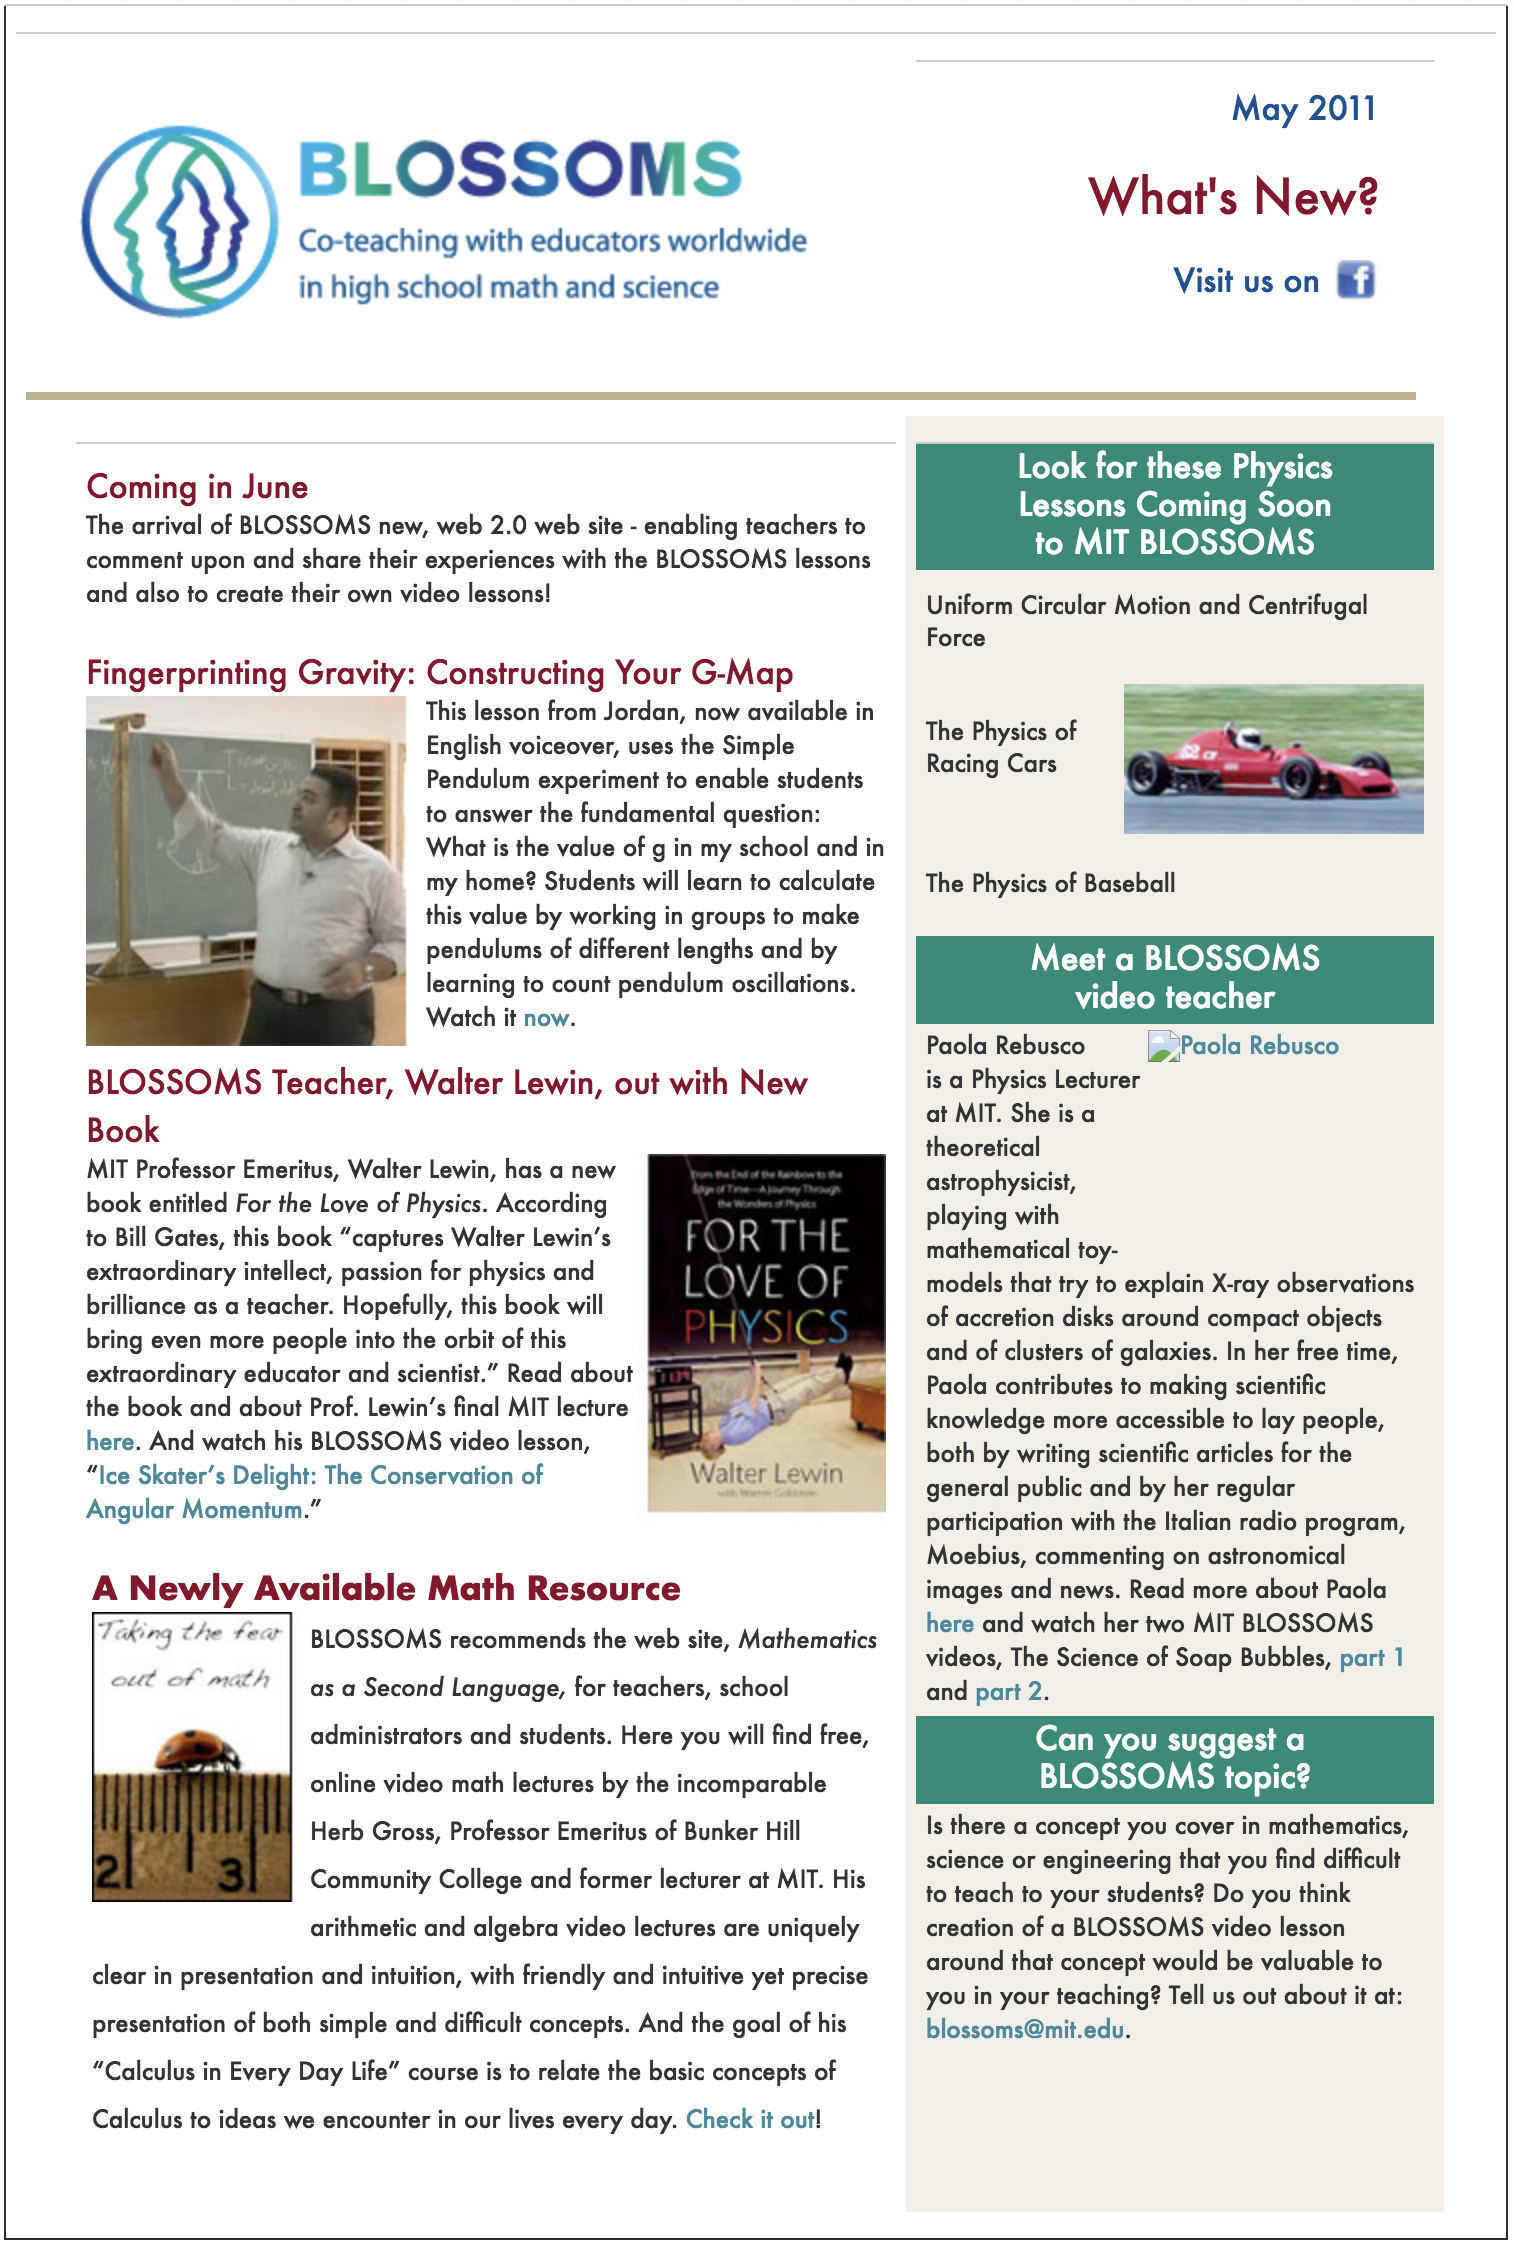 May 2011 BLOSSOMS Newsletter